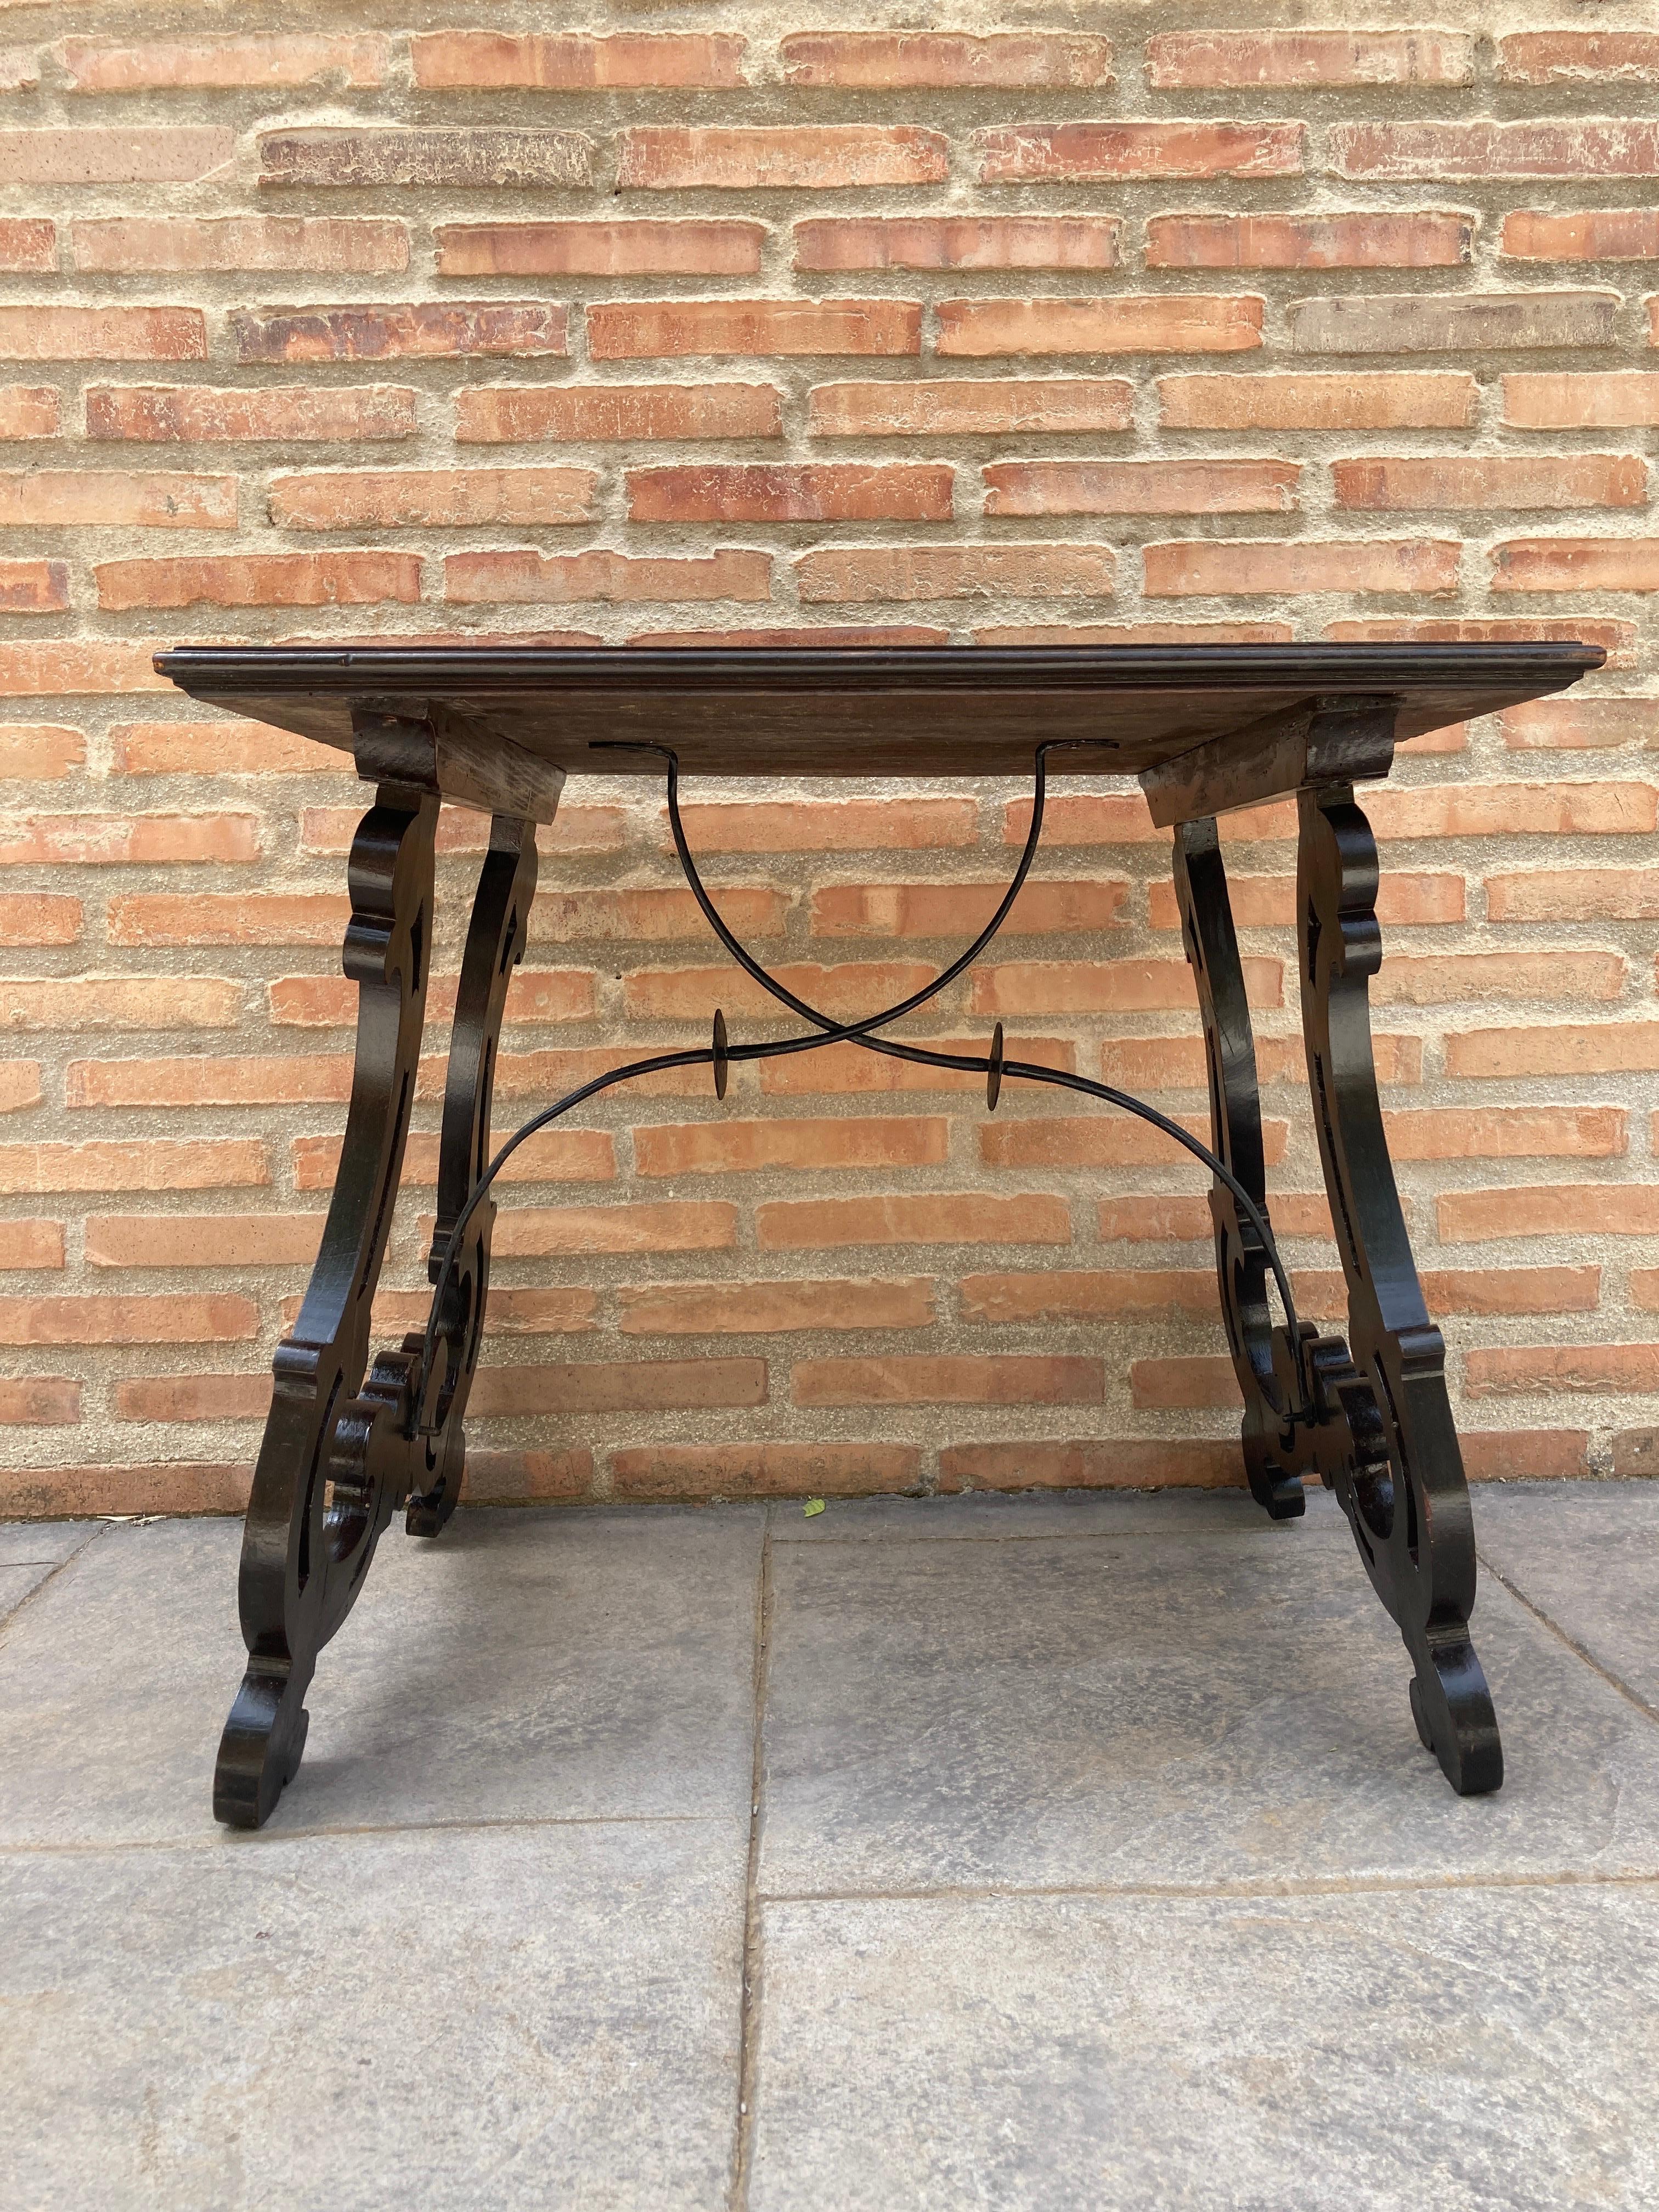 19th century Baroque Spanish side table with marquetry top

19th century Spanish trestle table in walnut. This piece has a great scale, lovely lyre shaped legs with hand-forged iron stretcher and beautiful marquetry top. Nice patina on this walnut